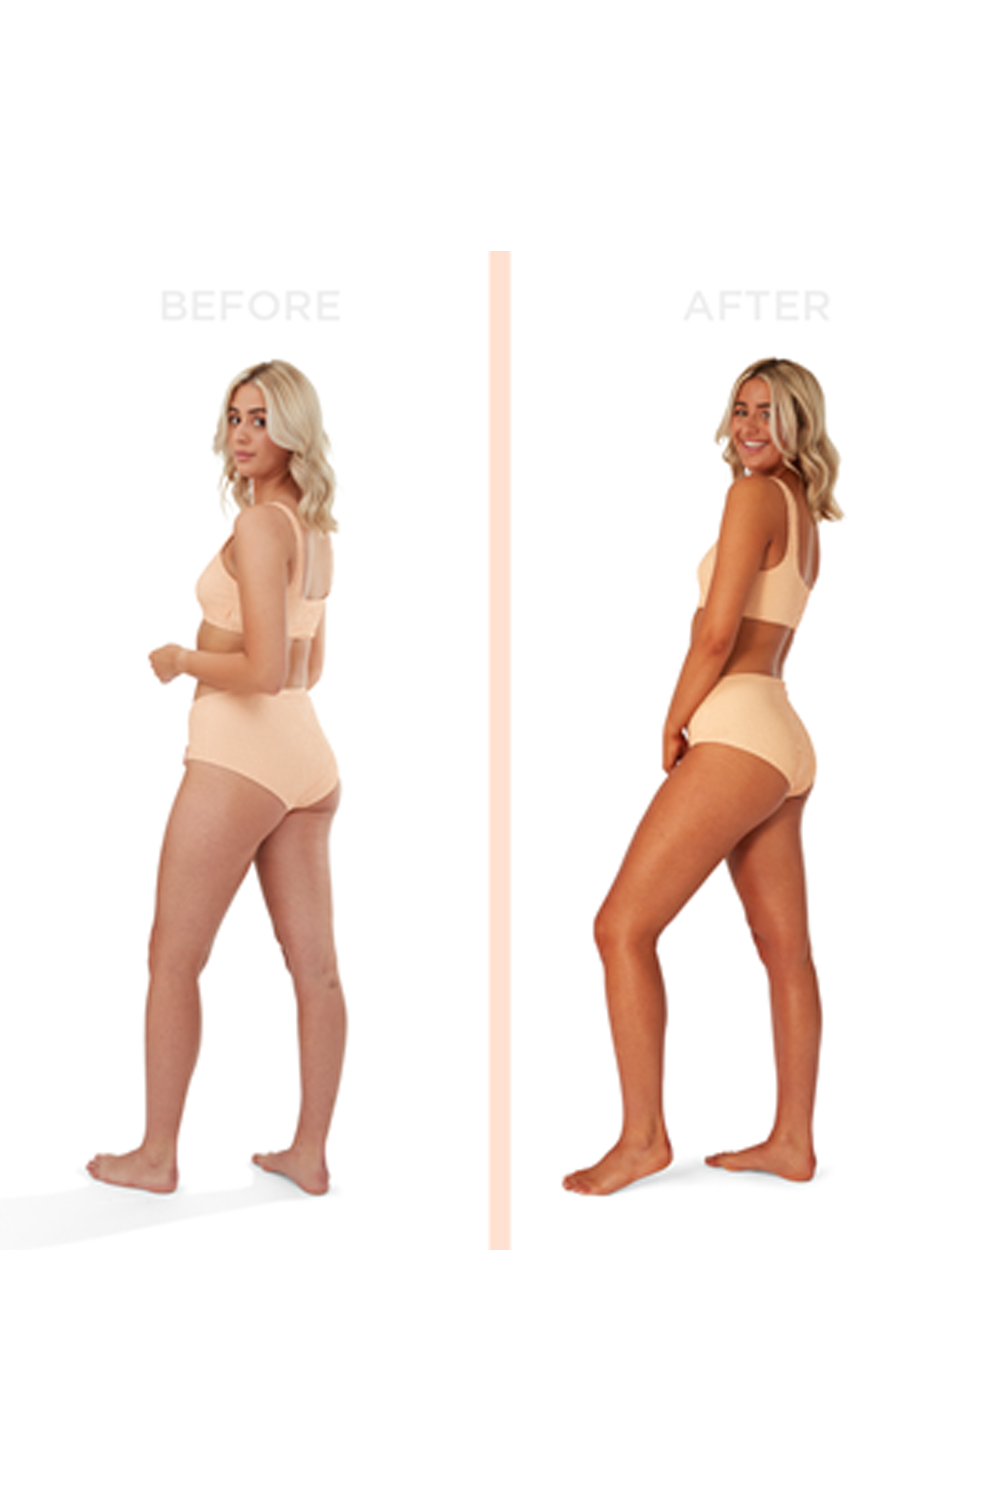 Clear Self-Tan Mousse